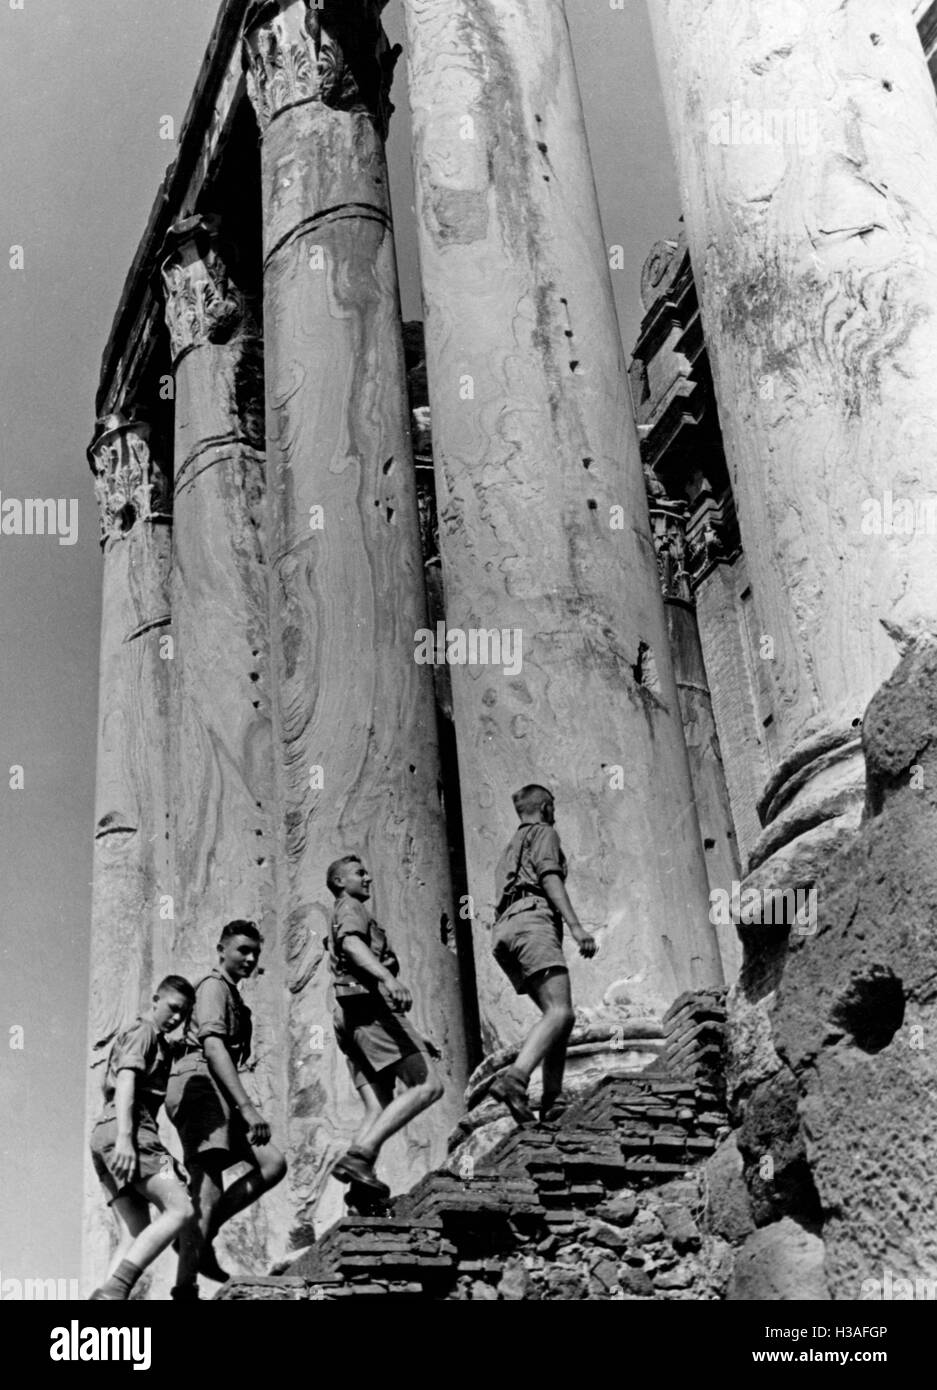 Hitler Youth members in an ancient temple during a tour of Italy, 1936 Stock Photo